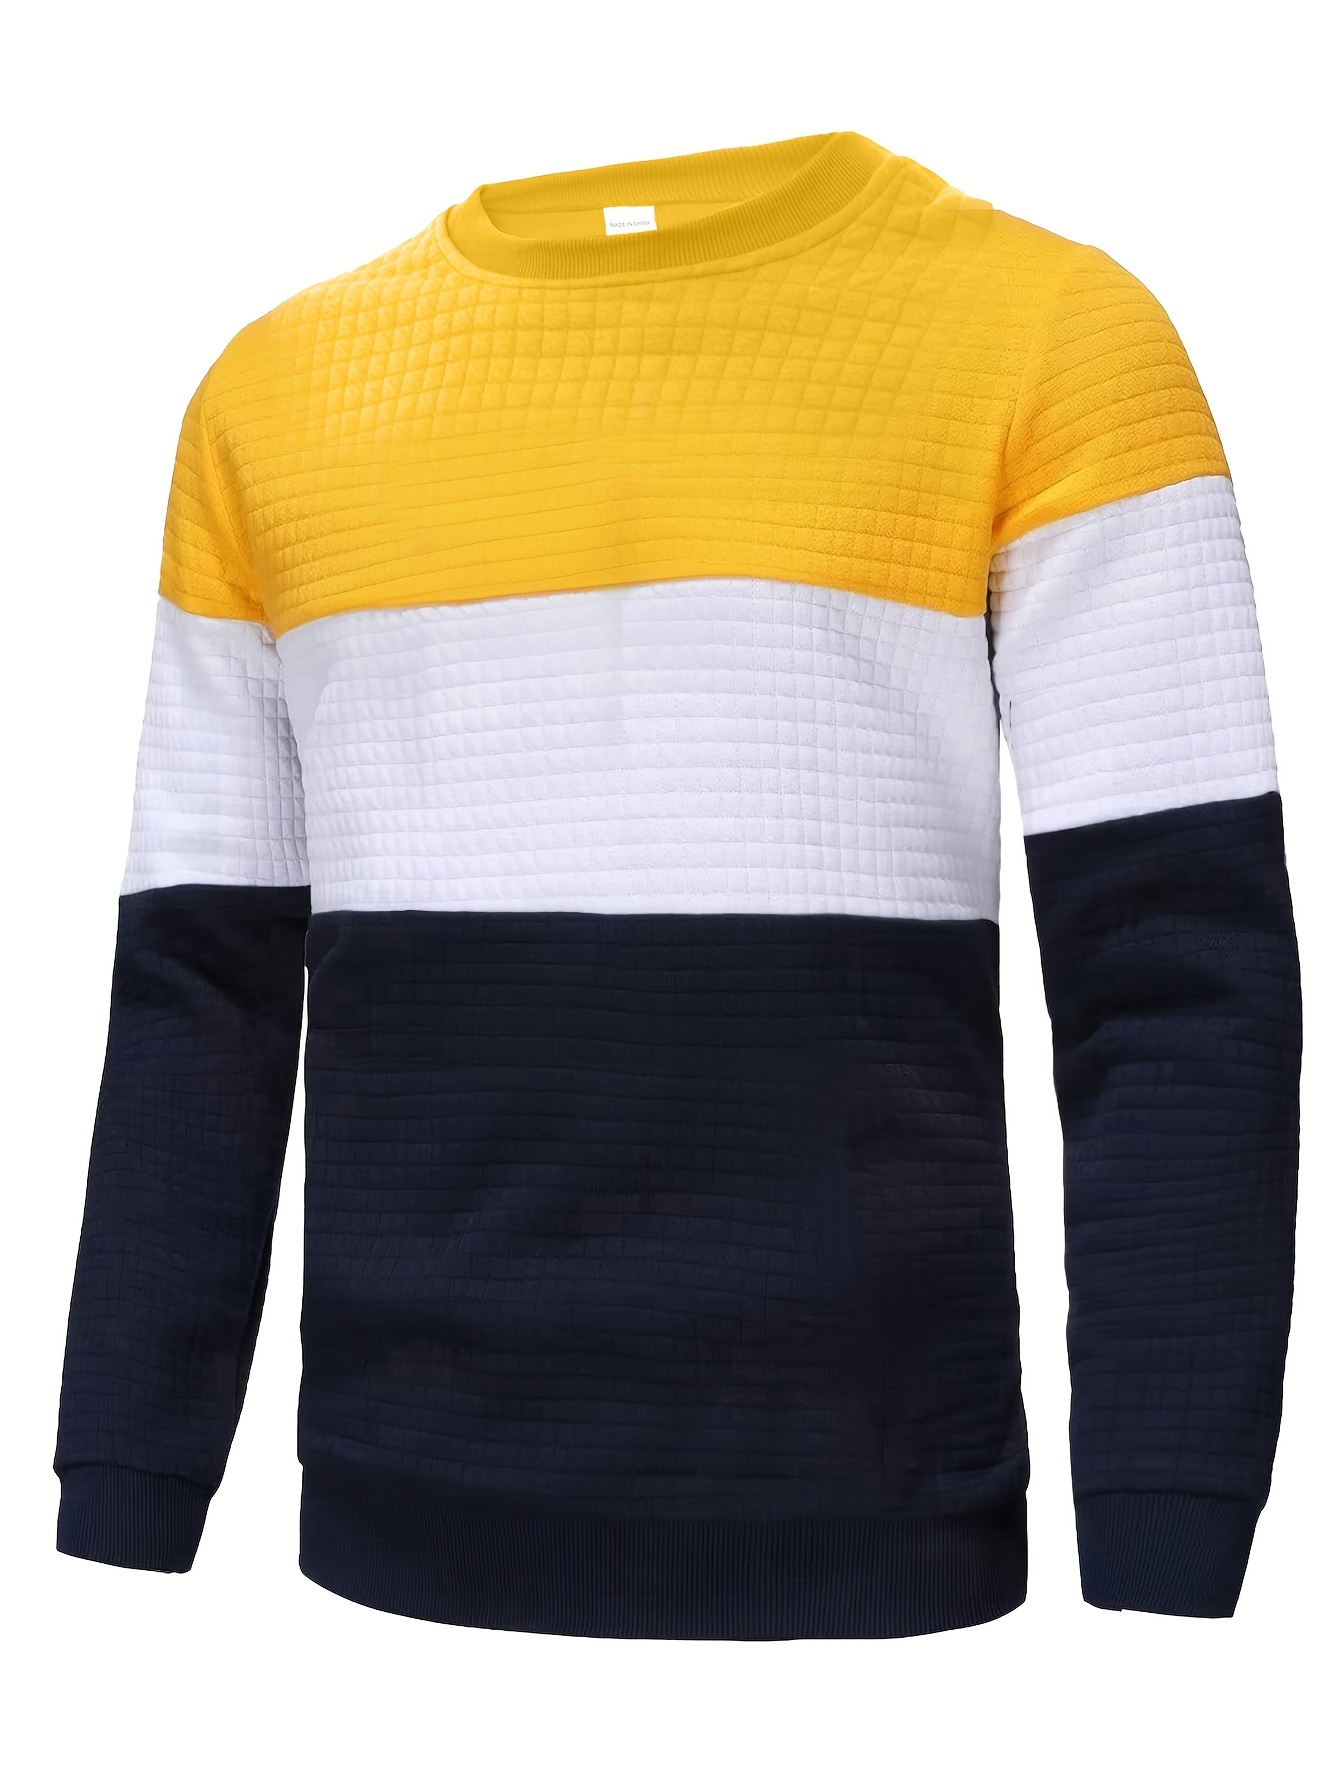 YYDGH Men's Waffle Sweater Long Sleeve Lightweight Classic Fit Sweater  Casual Crewneck Color Block Pullover Tops(Yellow,M)